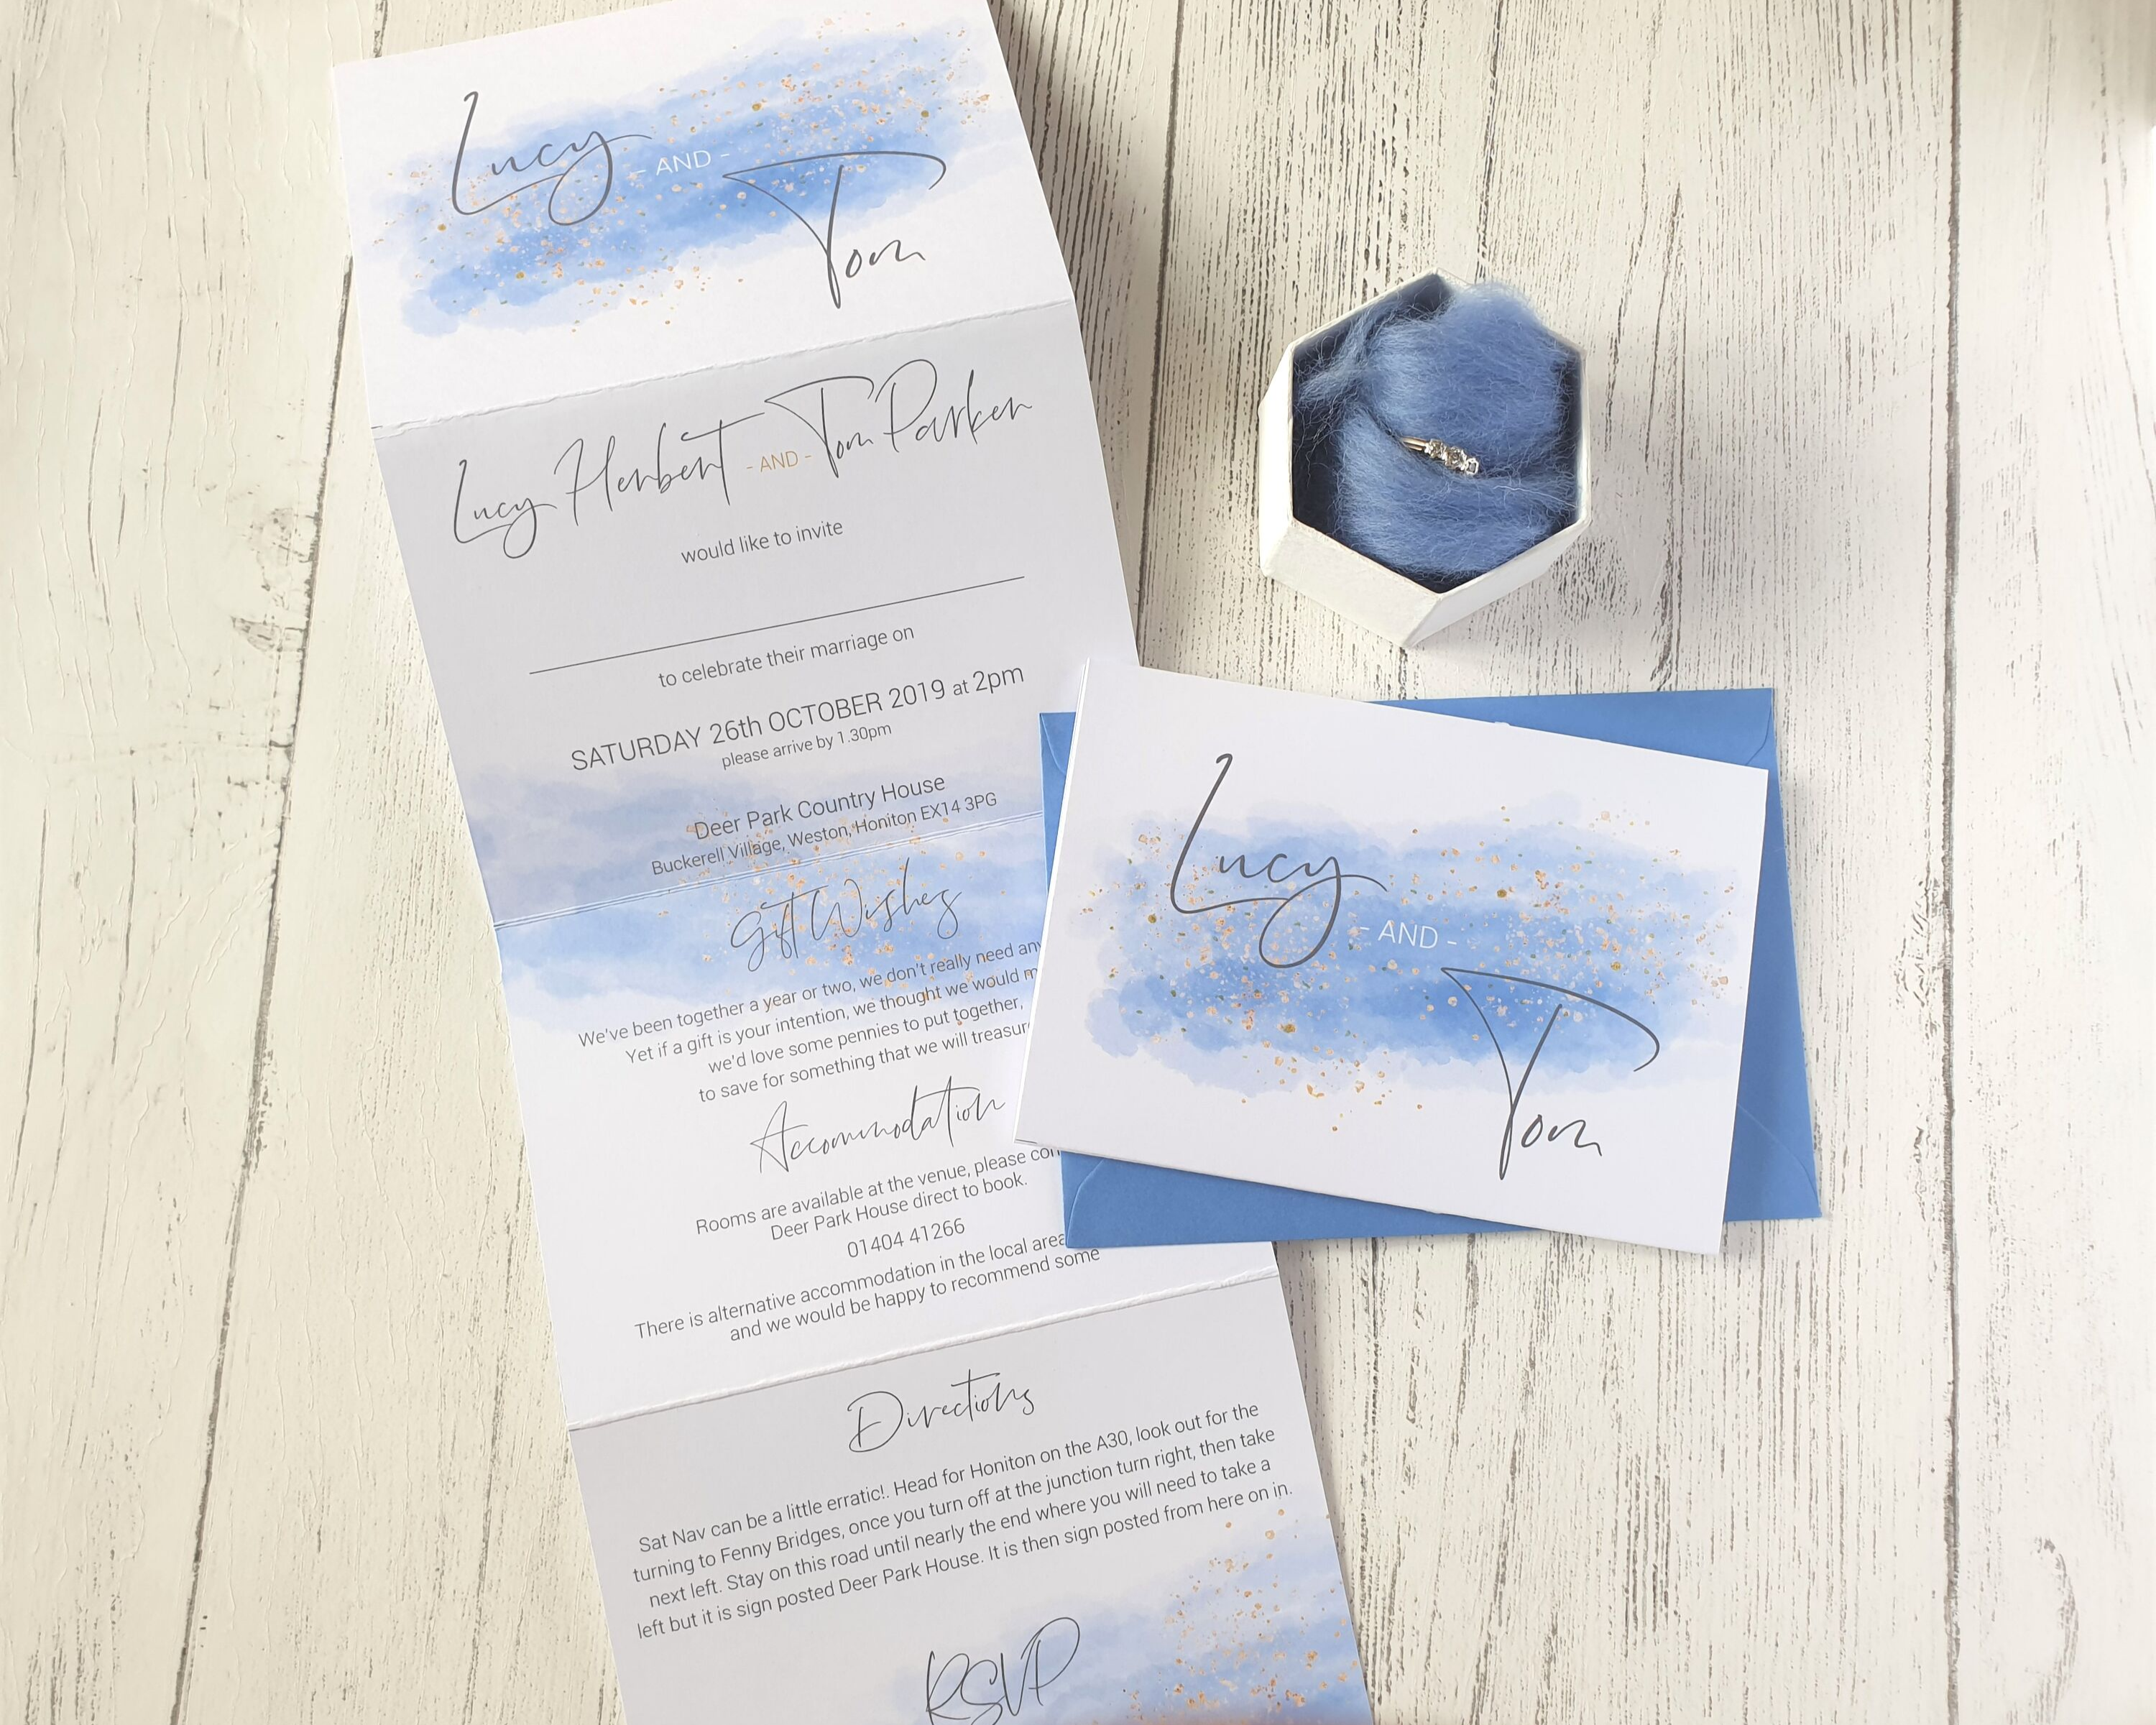 Watercolour blue splash A6 Poppleberry accordion fold all-in-one wedding invitation, folded & unfolded from its A6 size.